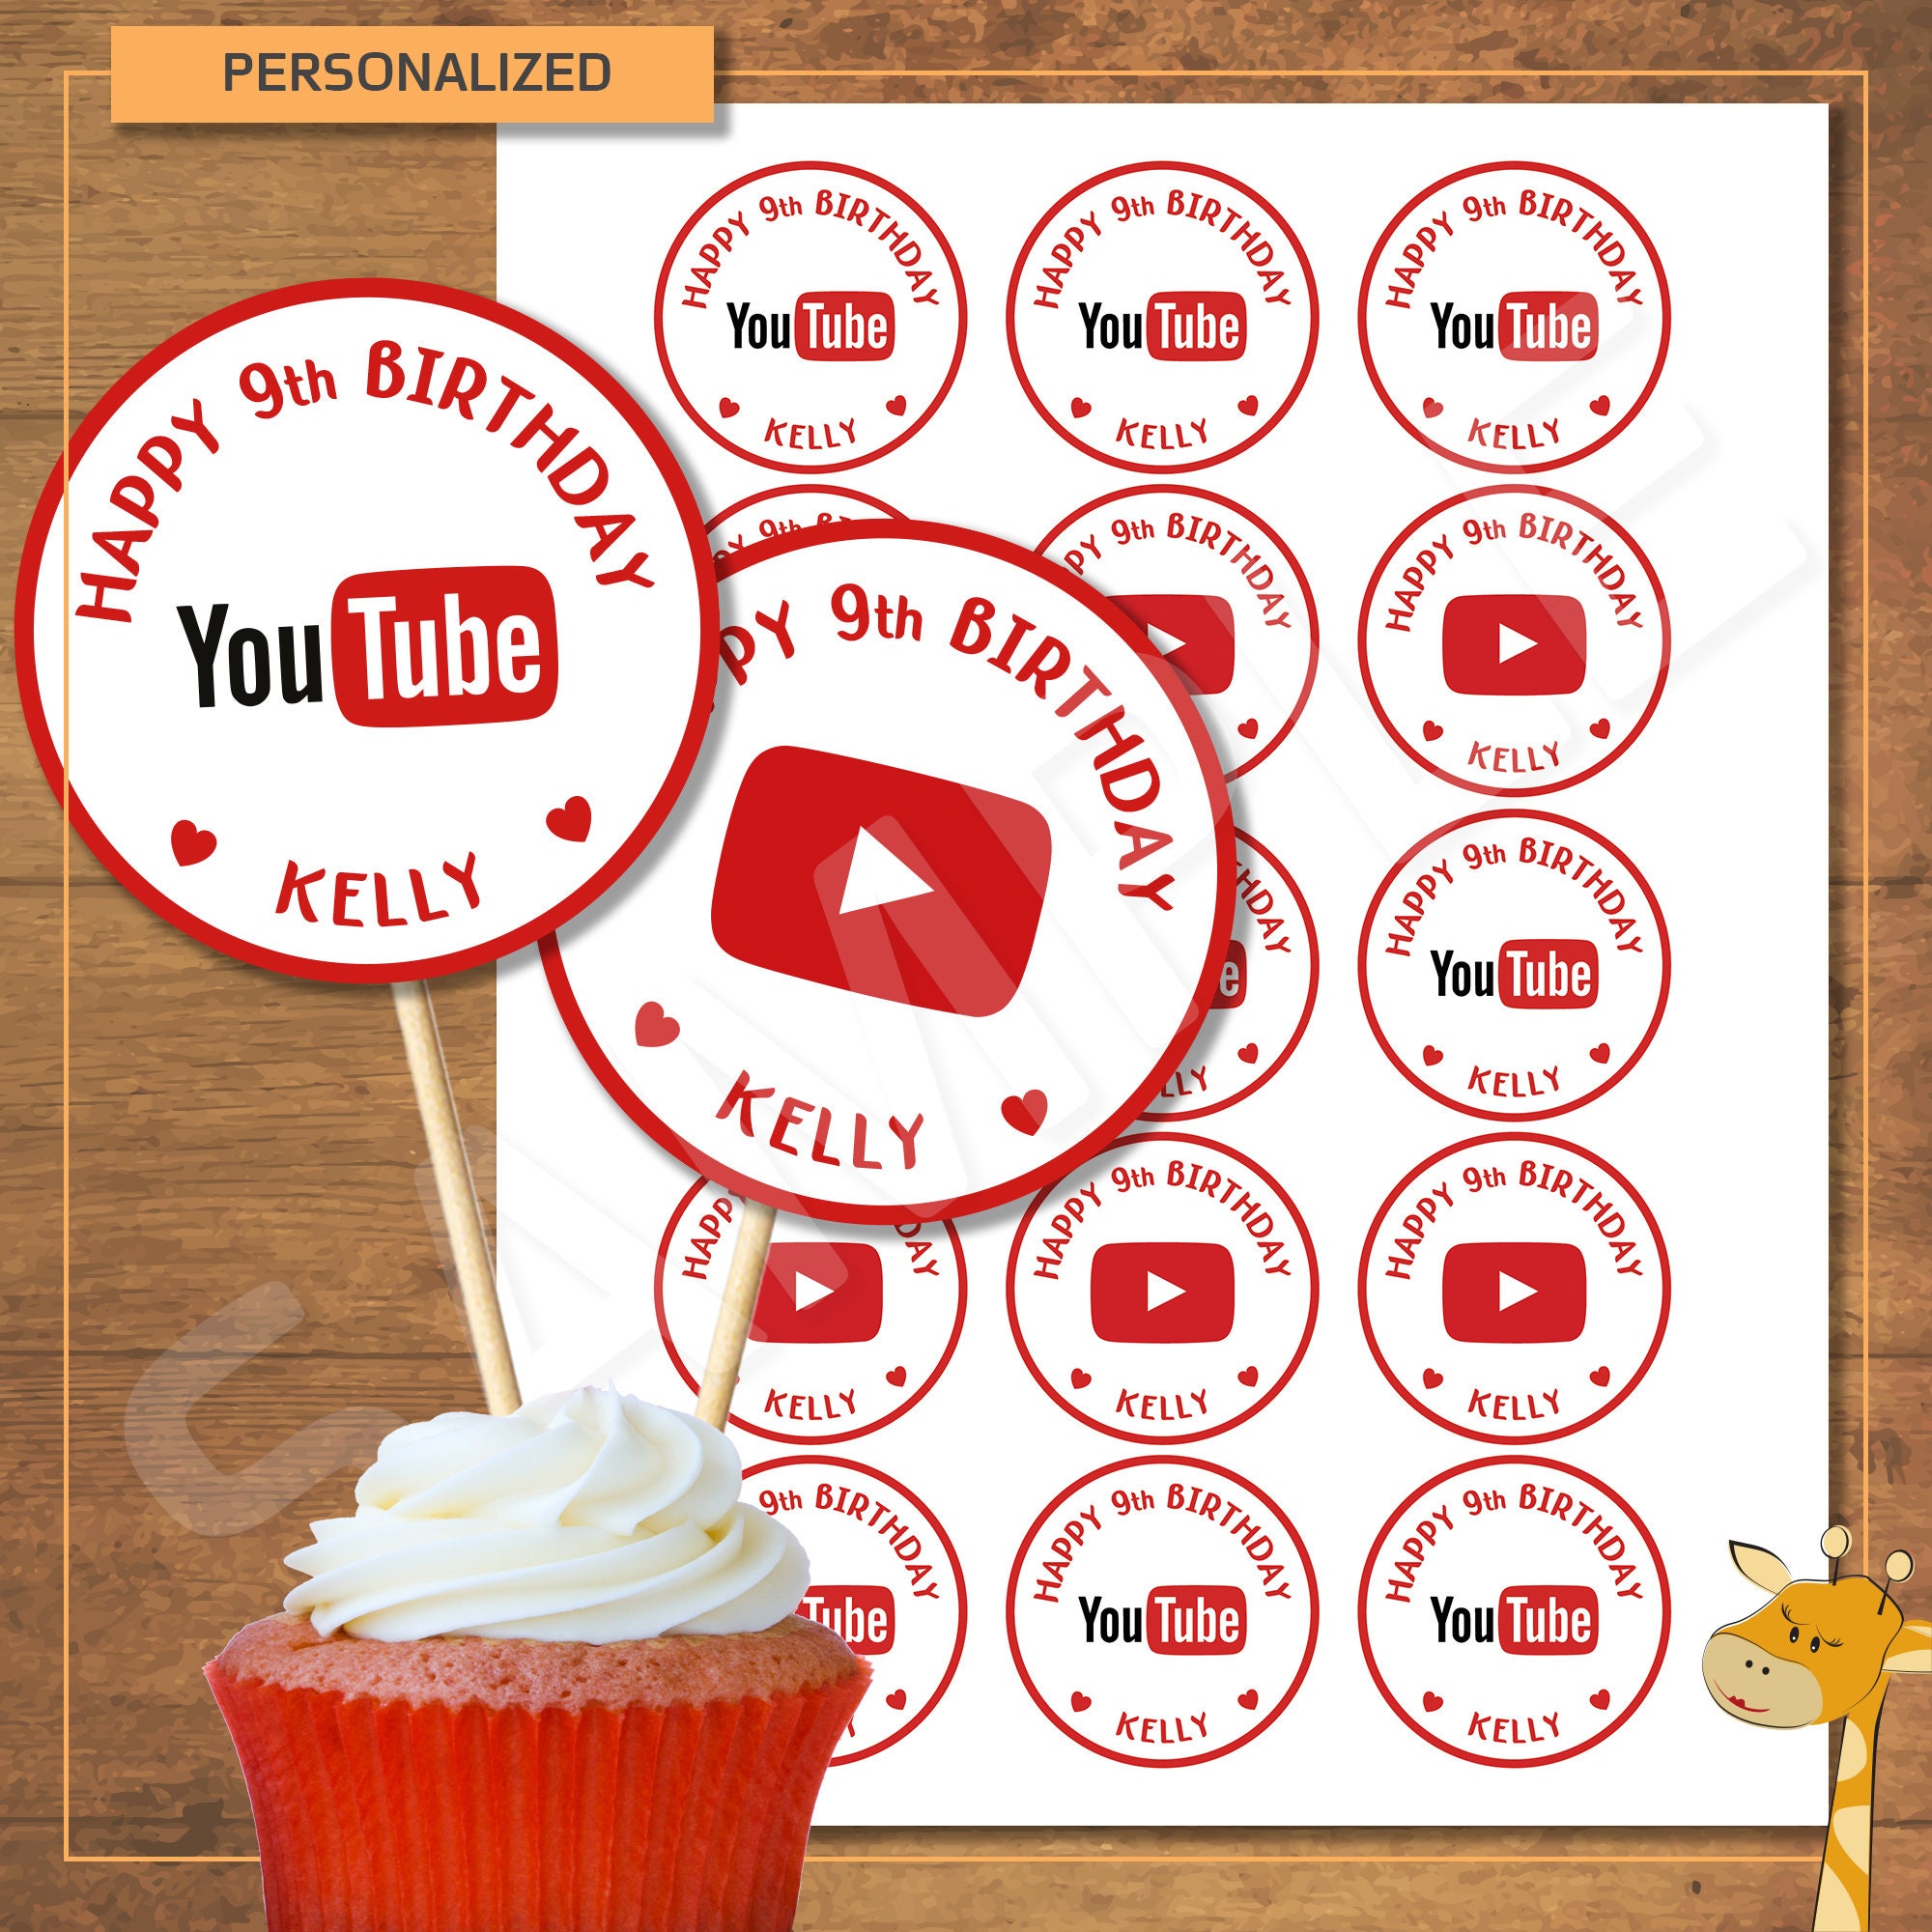 15 Youtube Cupcake Toppers PERSONALIZED Birthday Party - Etsy